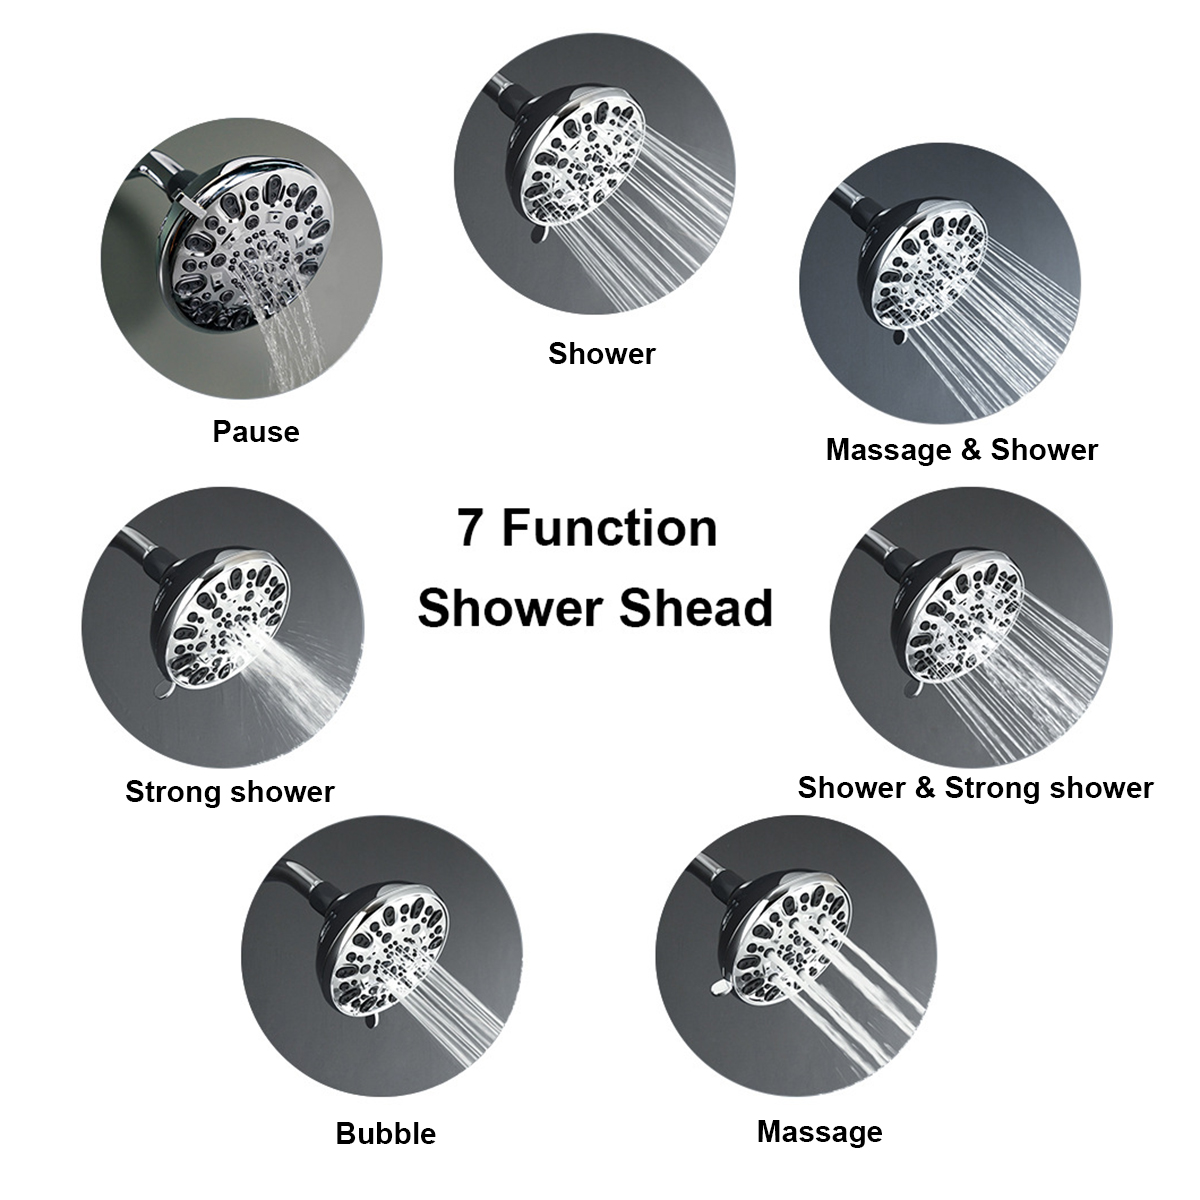 Handheld Showerhead & Rain Shower Combo Shower Head System Hose 3-way Water Diverter with Stainless Steel 5" Face Dual 2 in 1